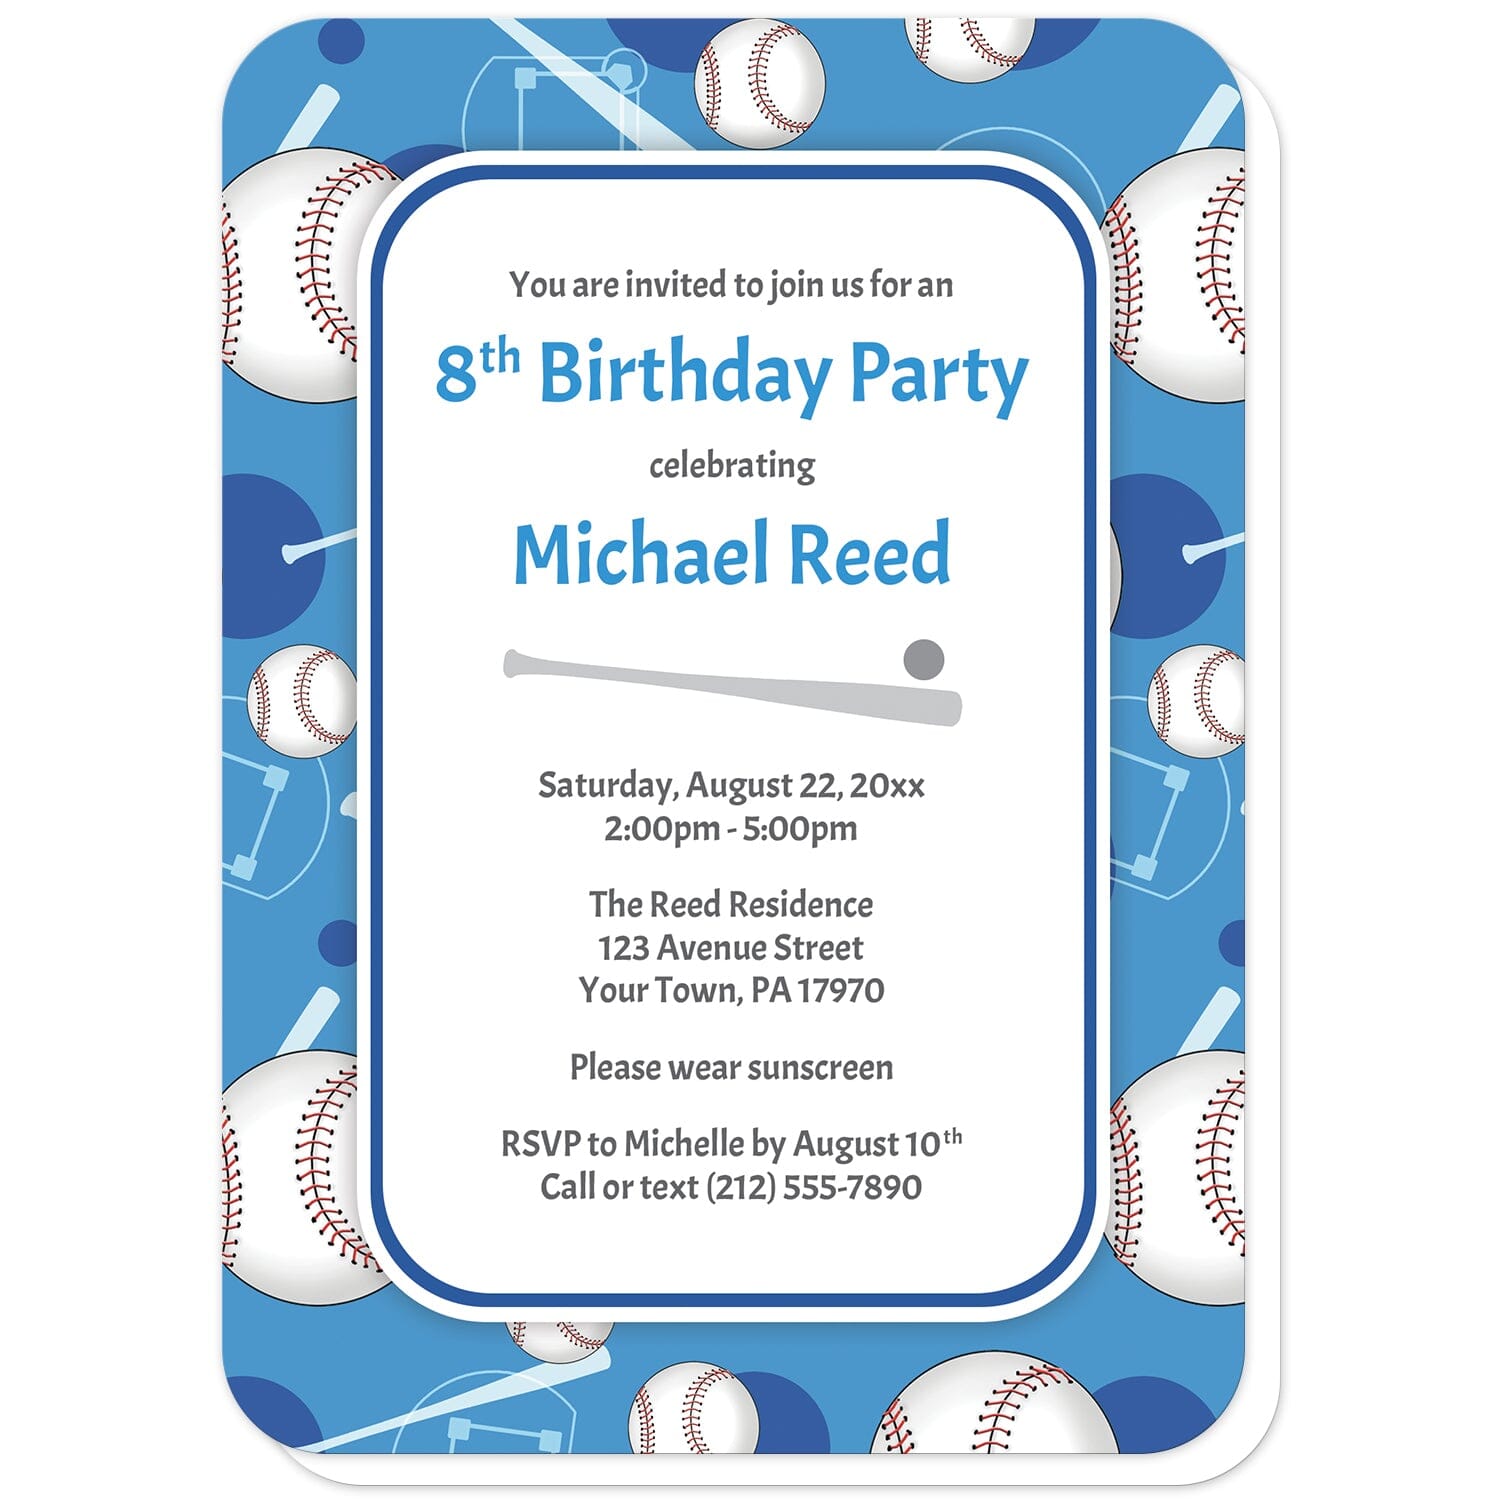 Baseball Themed Blue Pattern Birthday Party Invitations (with rounded corners) at Artistically Invited. Baseball themed blue pattern birthday party invitations for any age or milestone that are uniquely illustrated with a baseball pattern with baseballs, baseball bats, and baseball diamonds, over a blue background color. Your personalized birthday party details are custom printed in blue and gray over white in the center. 